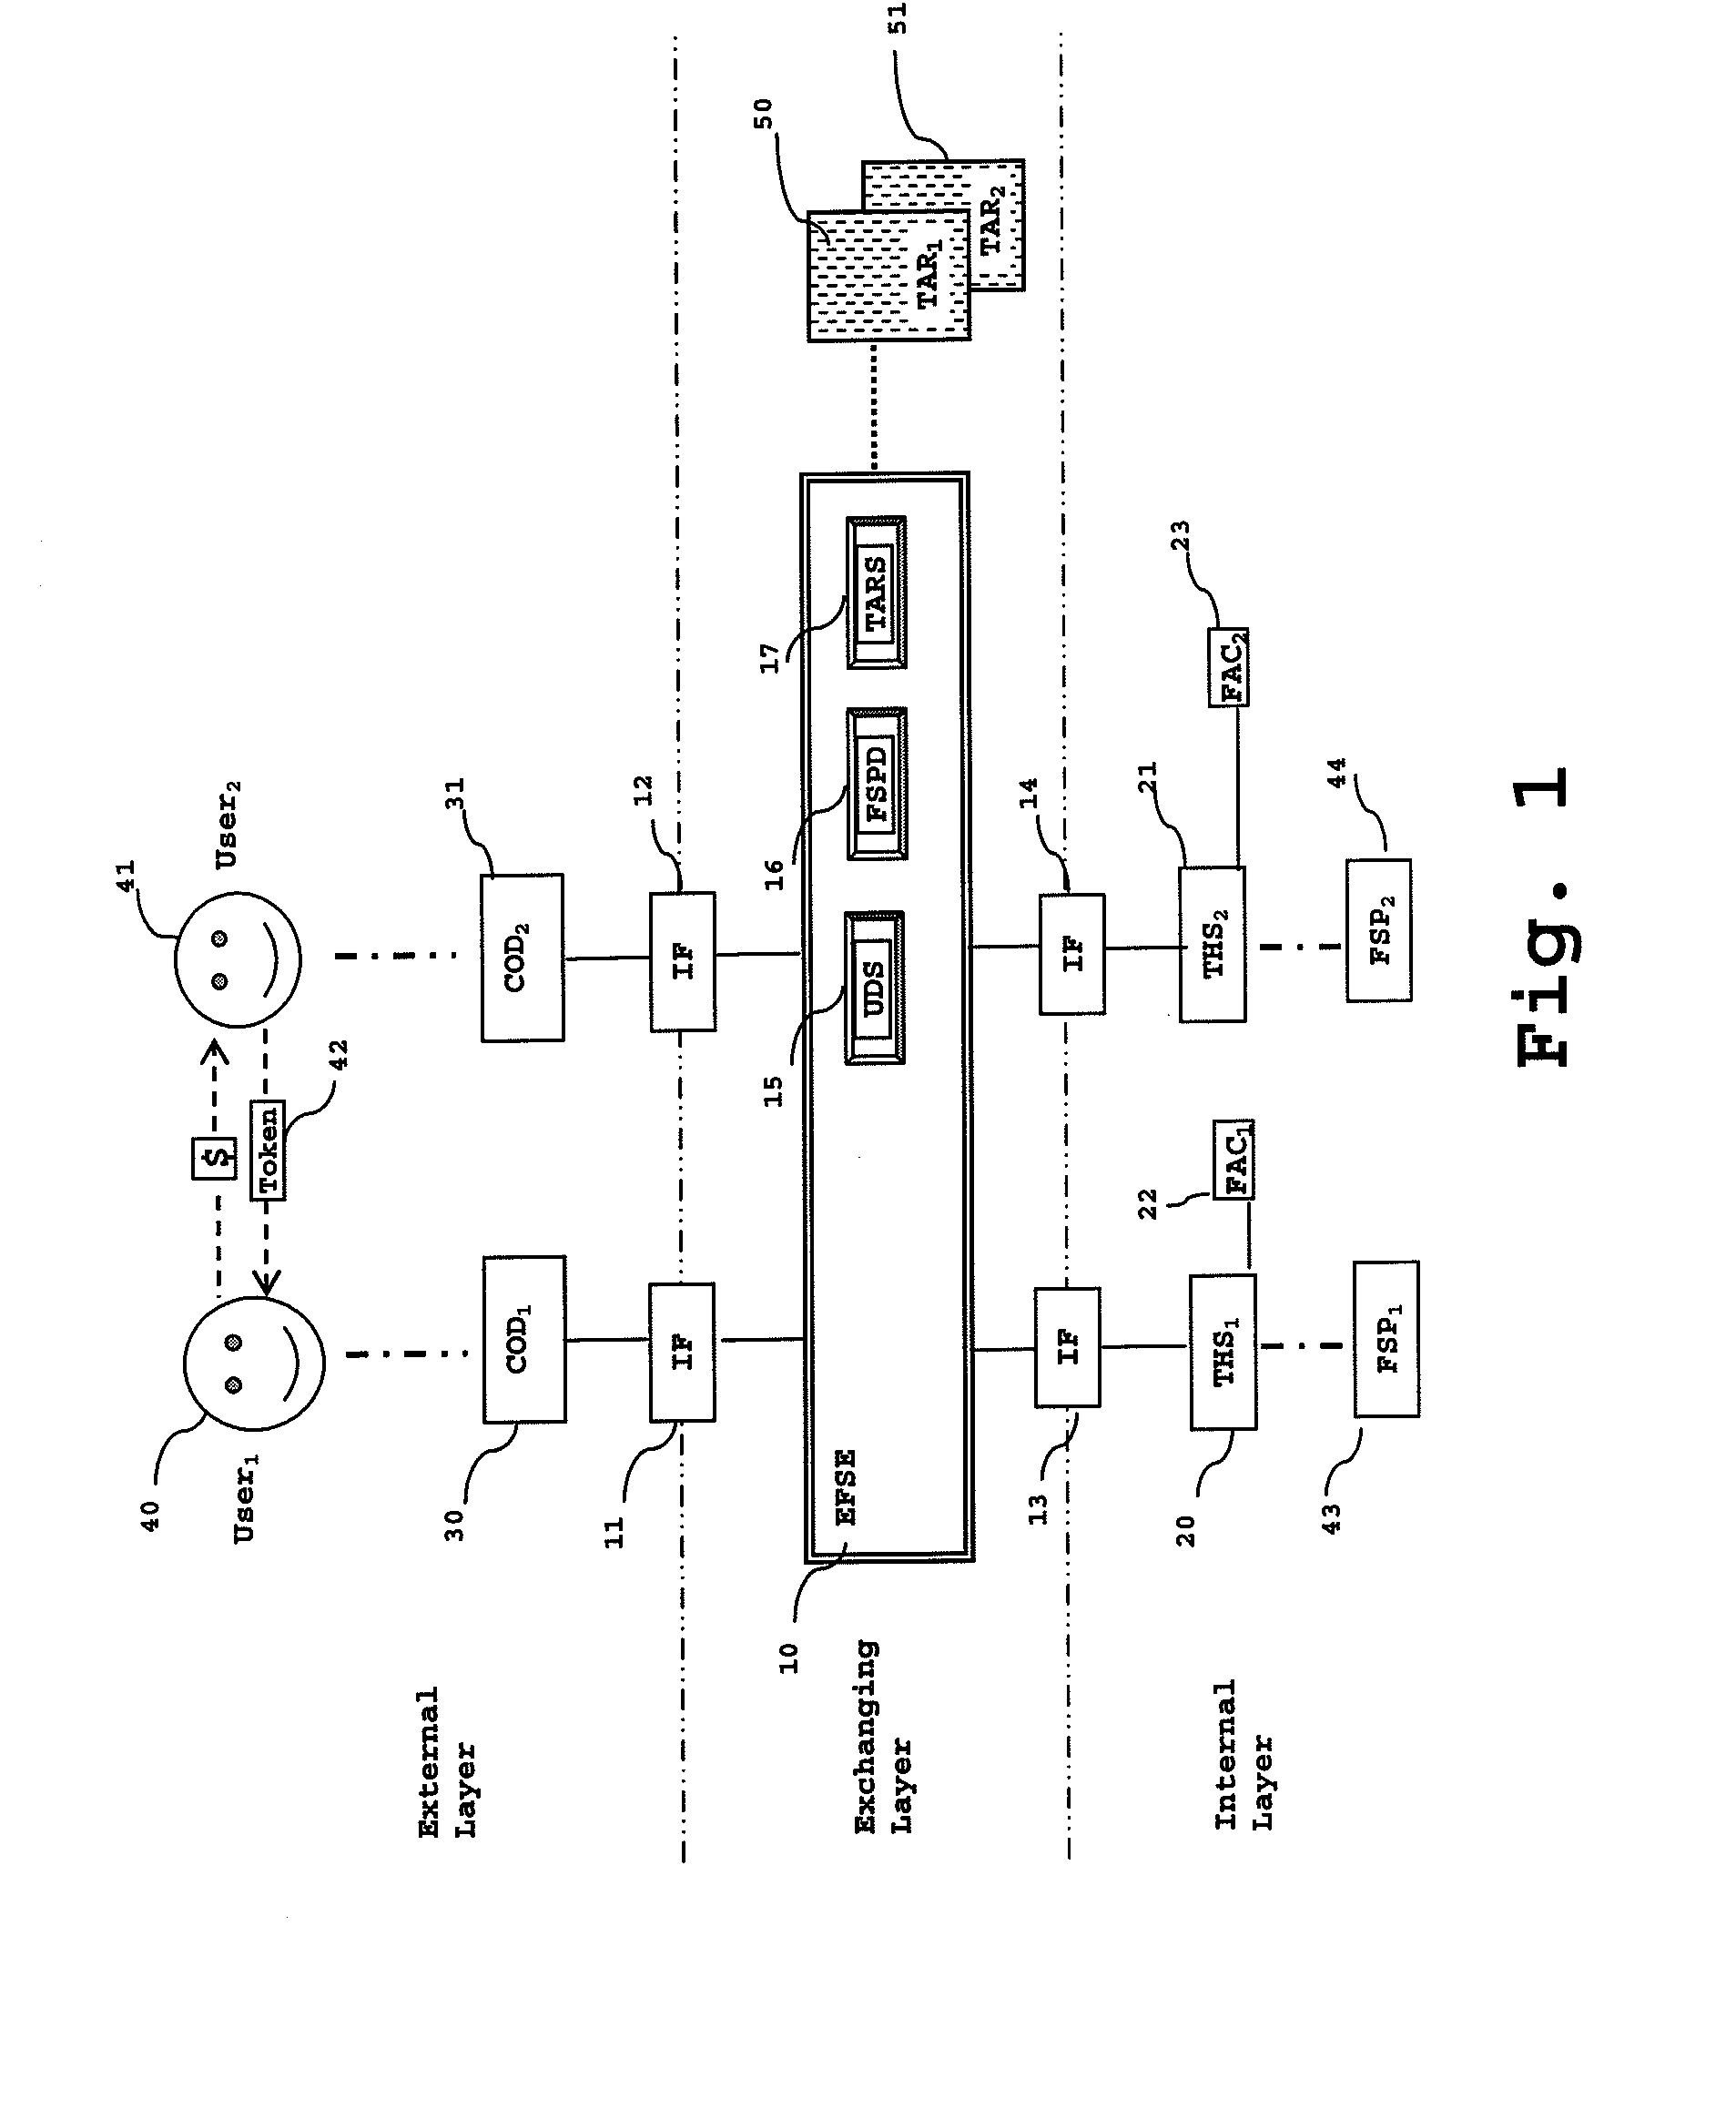 Method and system for secure handling of electronic financial transactions